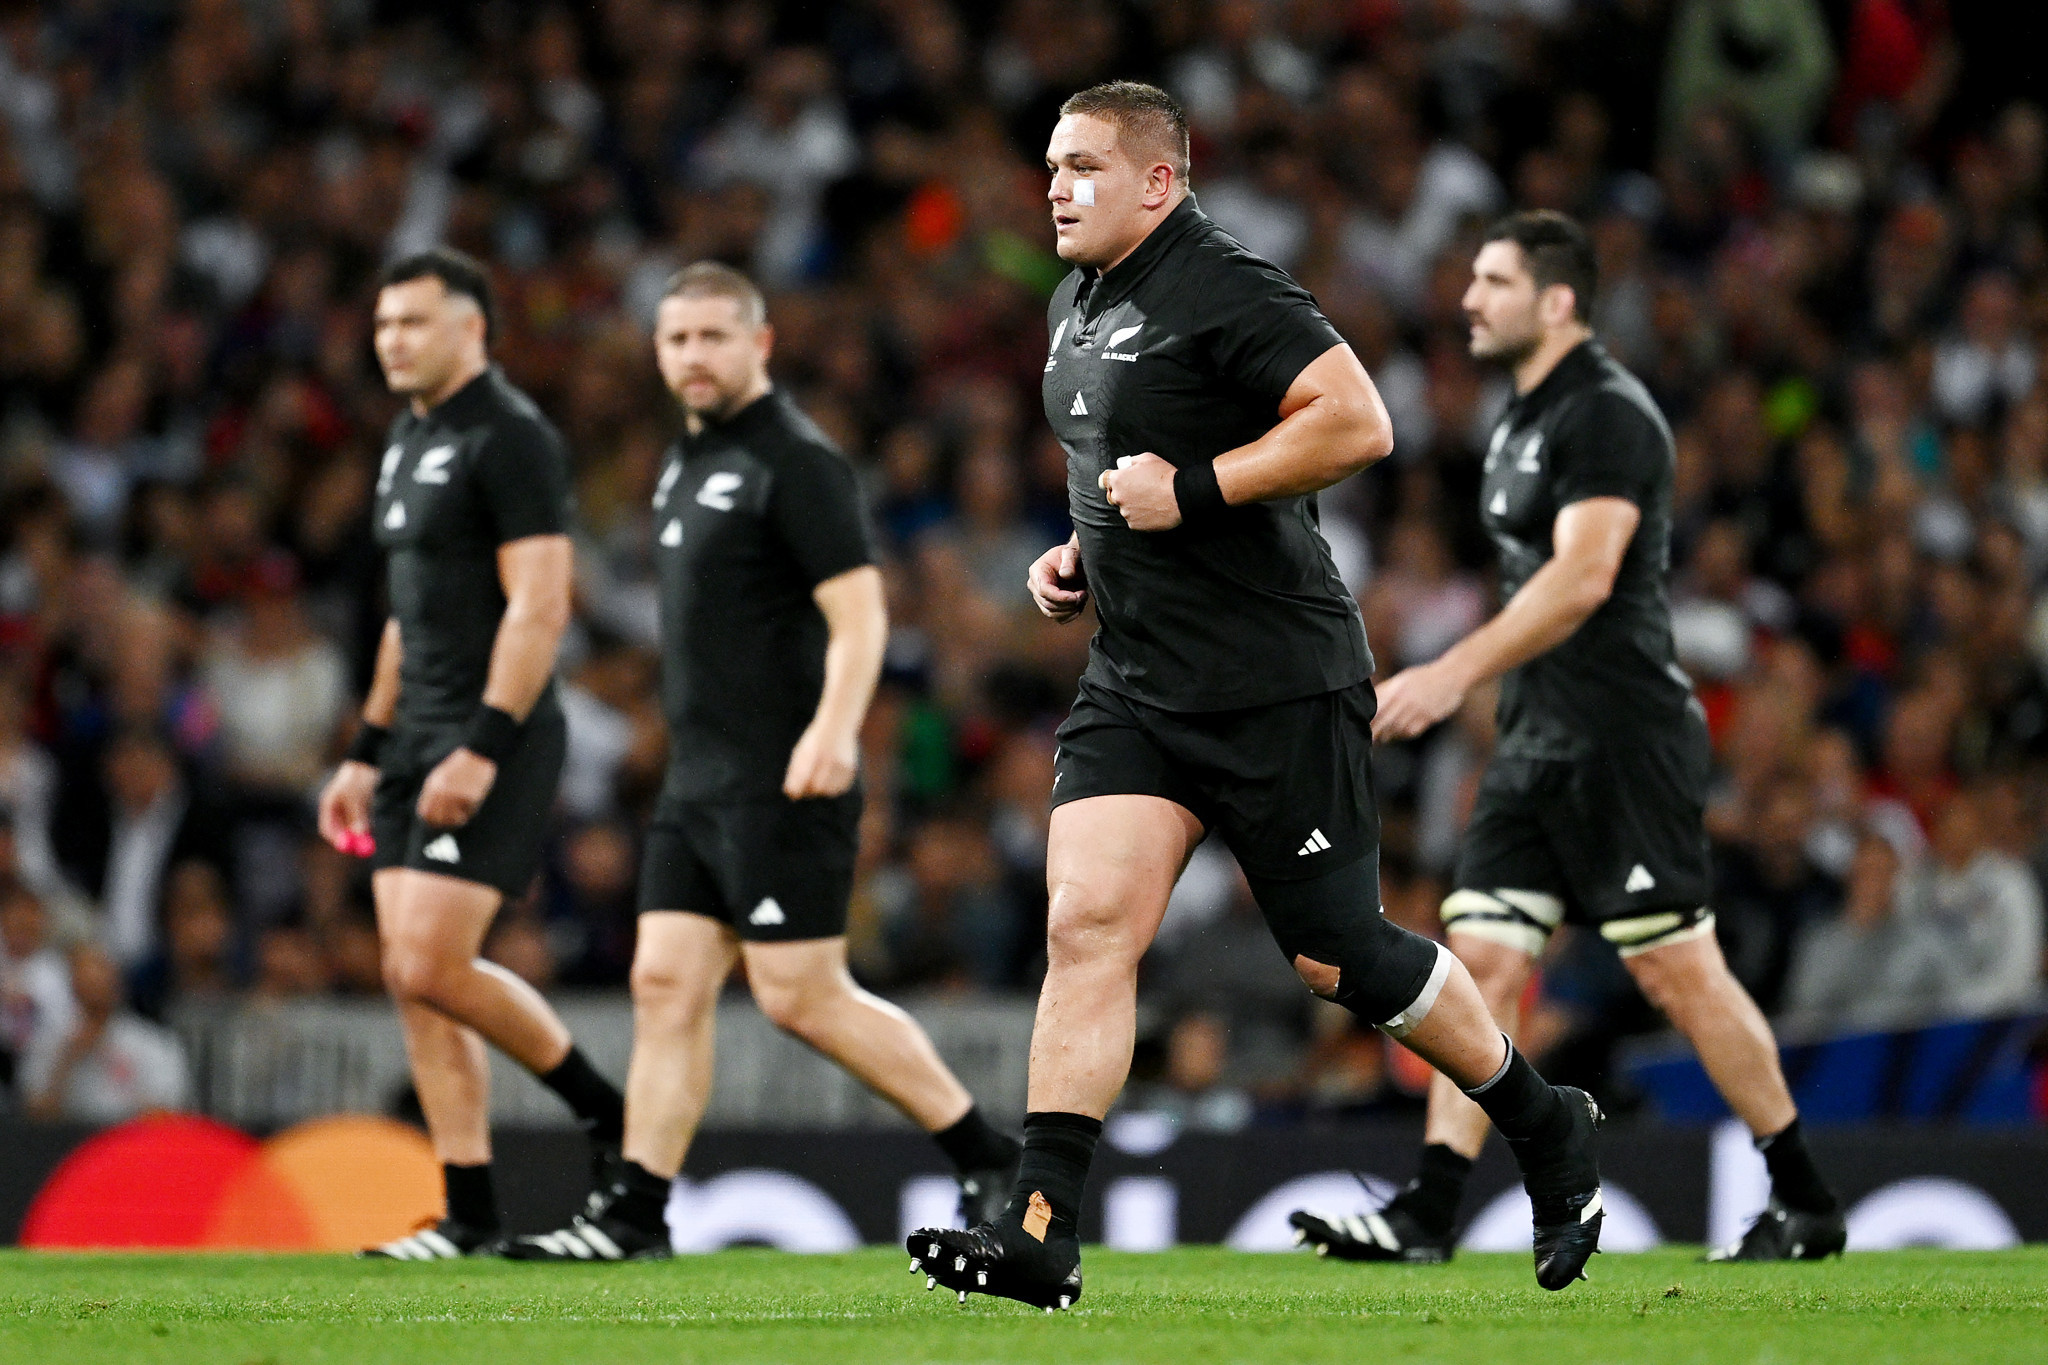 There was more drama in the game as Ethan de Groot of New Zealand was shown a red card for a high tackle on Adrian Booysen ©Getty Images